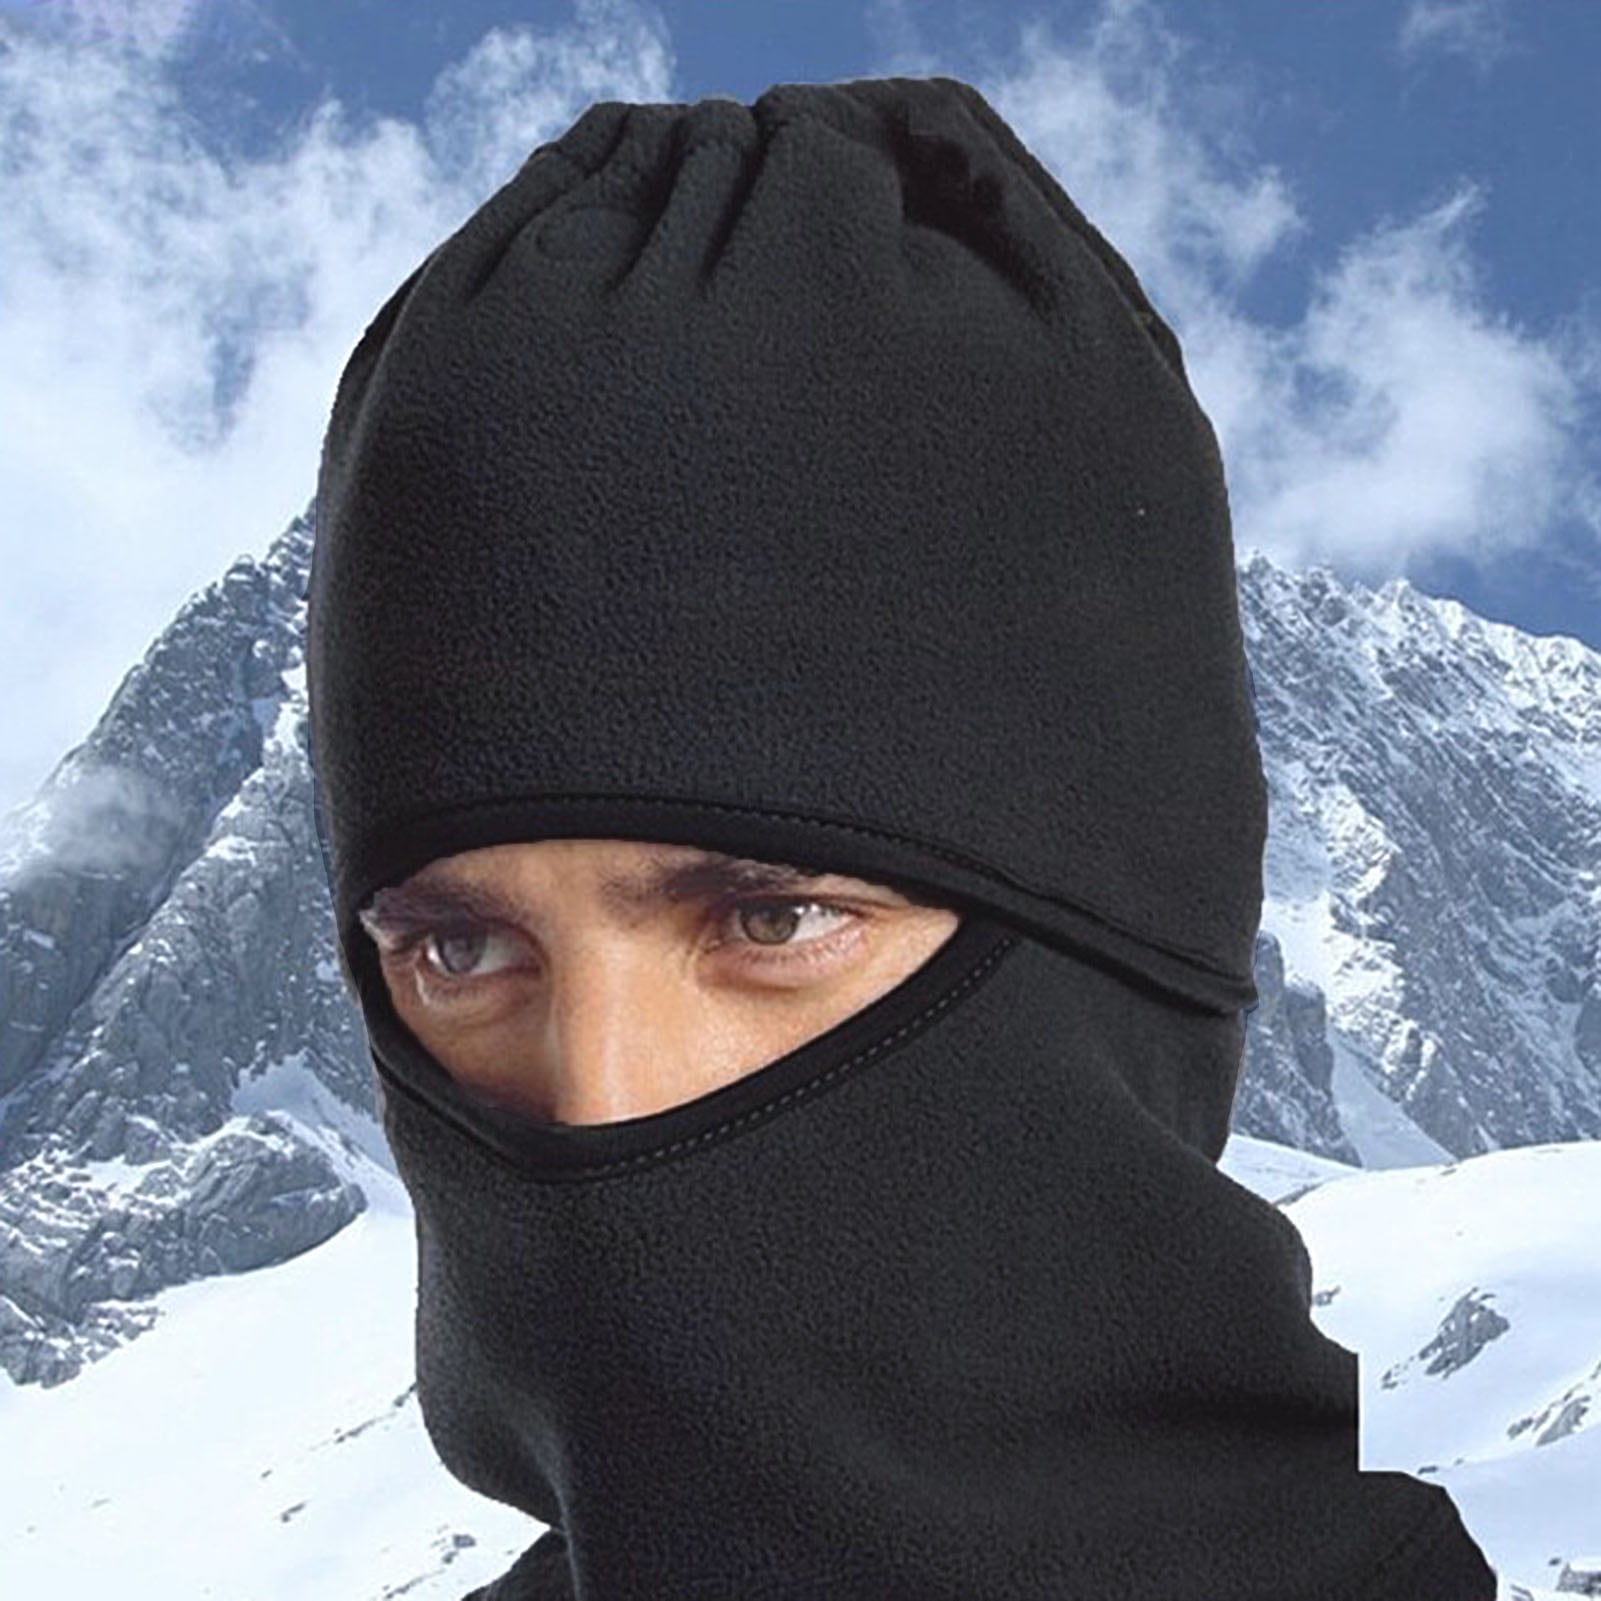 Winter Warmer Balaclava Outdoor Ski Cycling Windproof Face Mask Head Cover Hat 